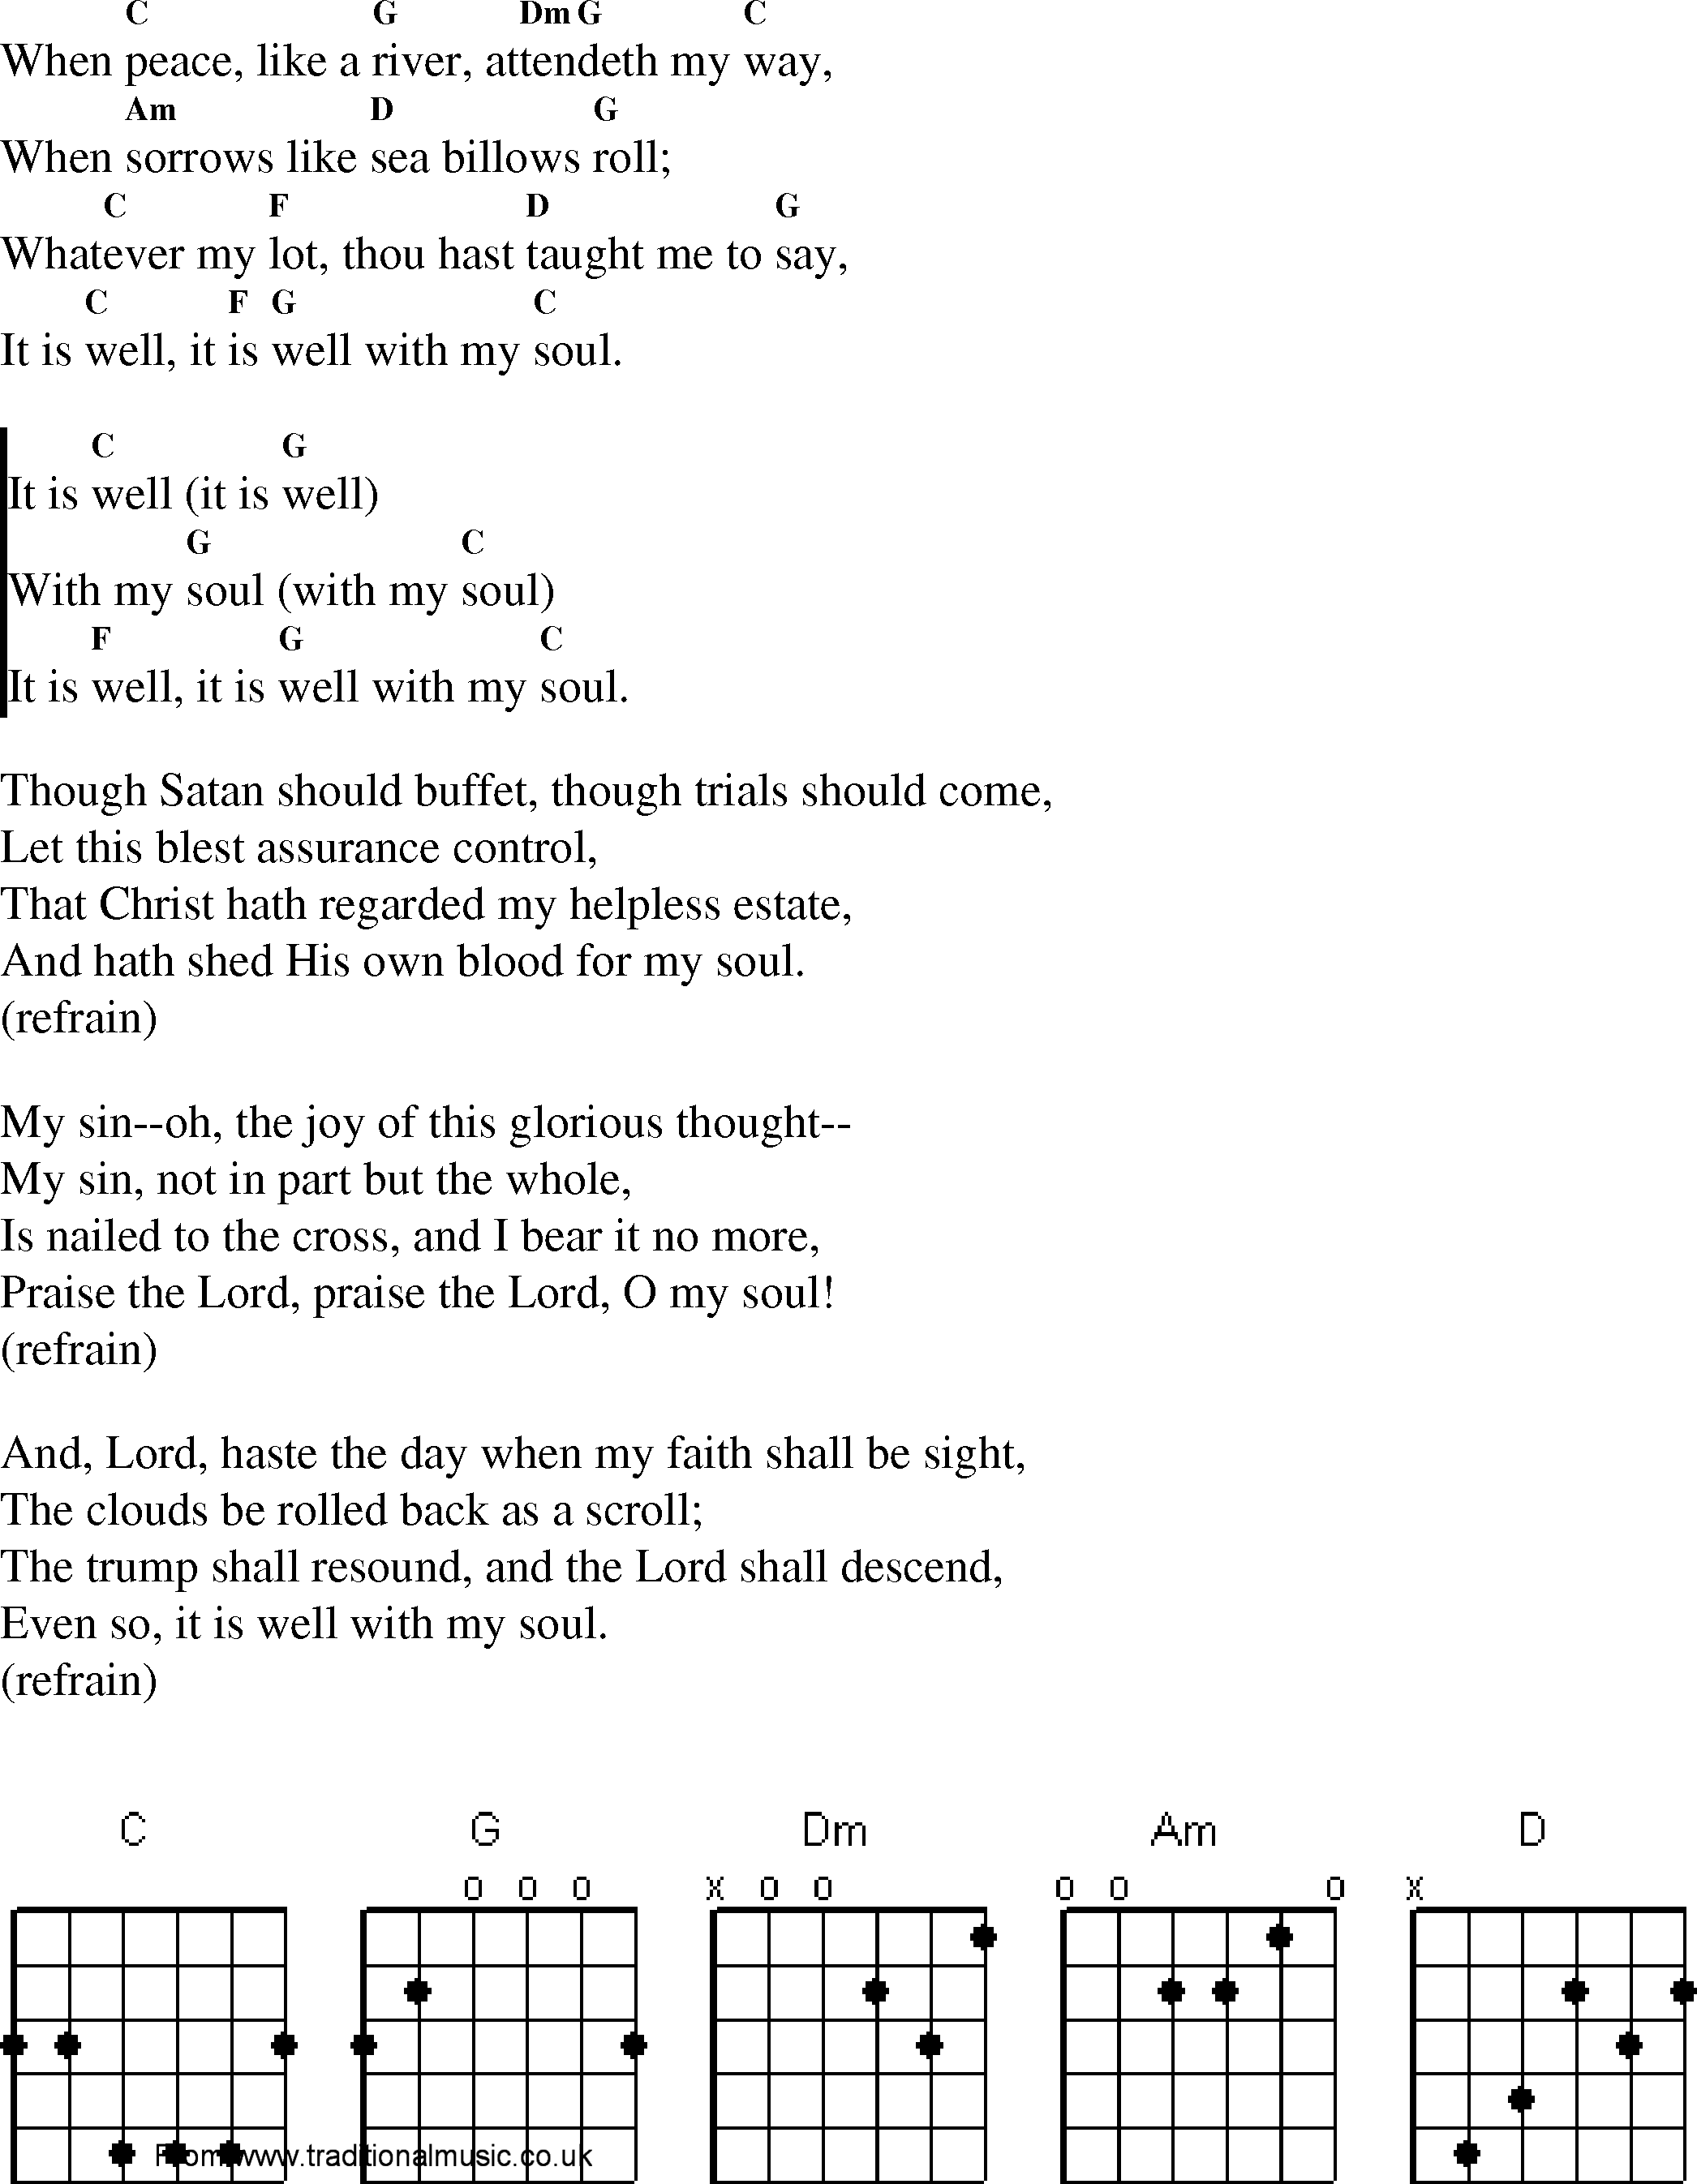 Gospel Song: it_is_well_with_my_soul, lyrics and chords.